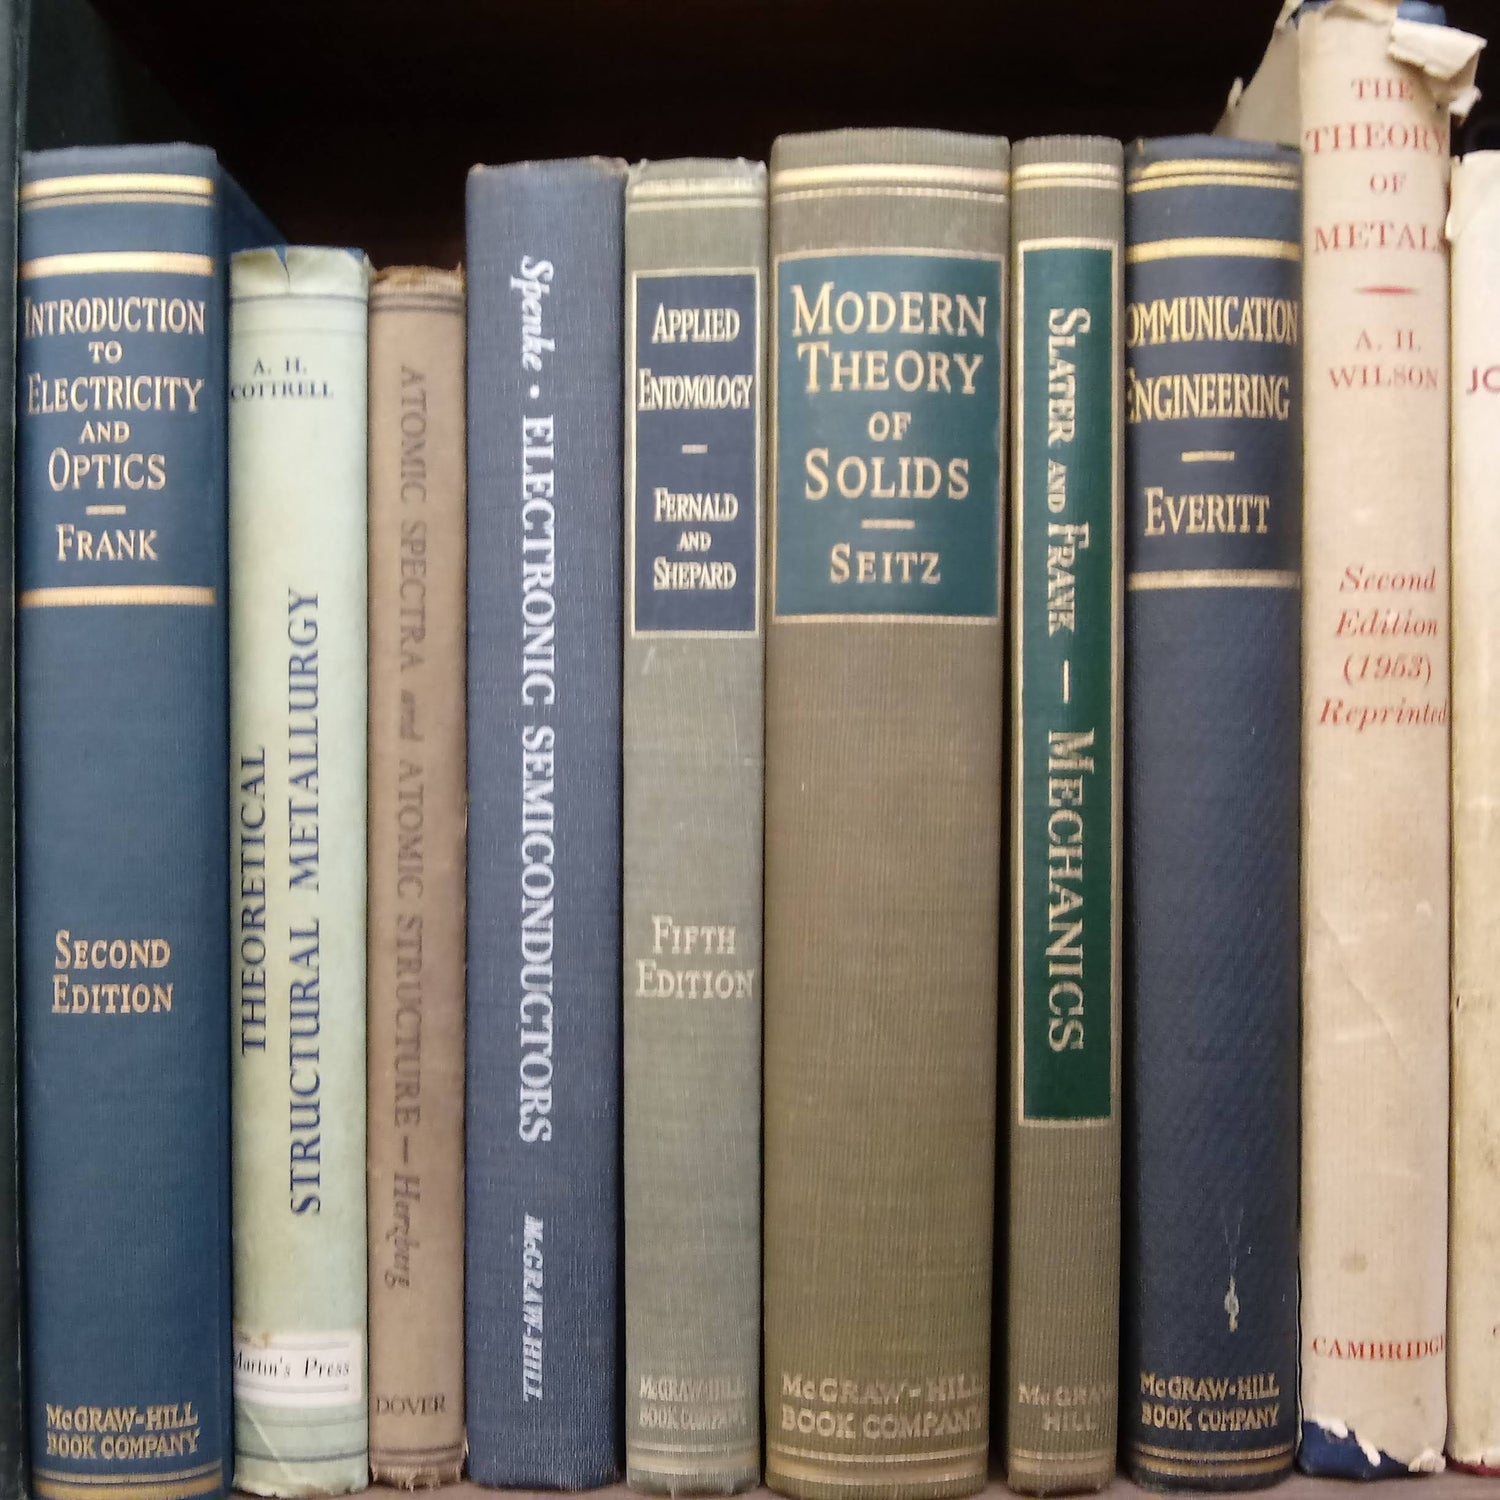 Vintage mechanical engineering and physics books on a shelf